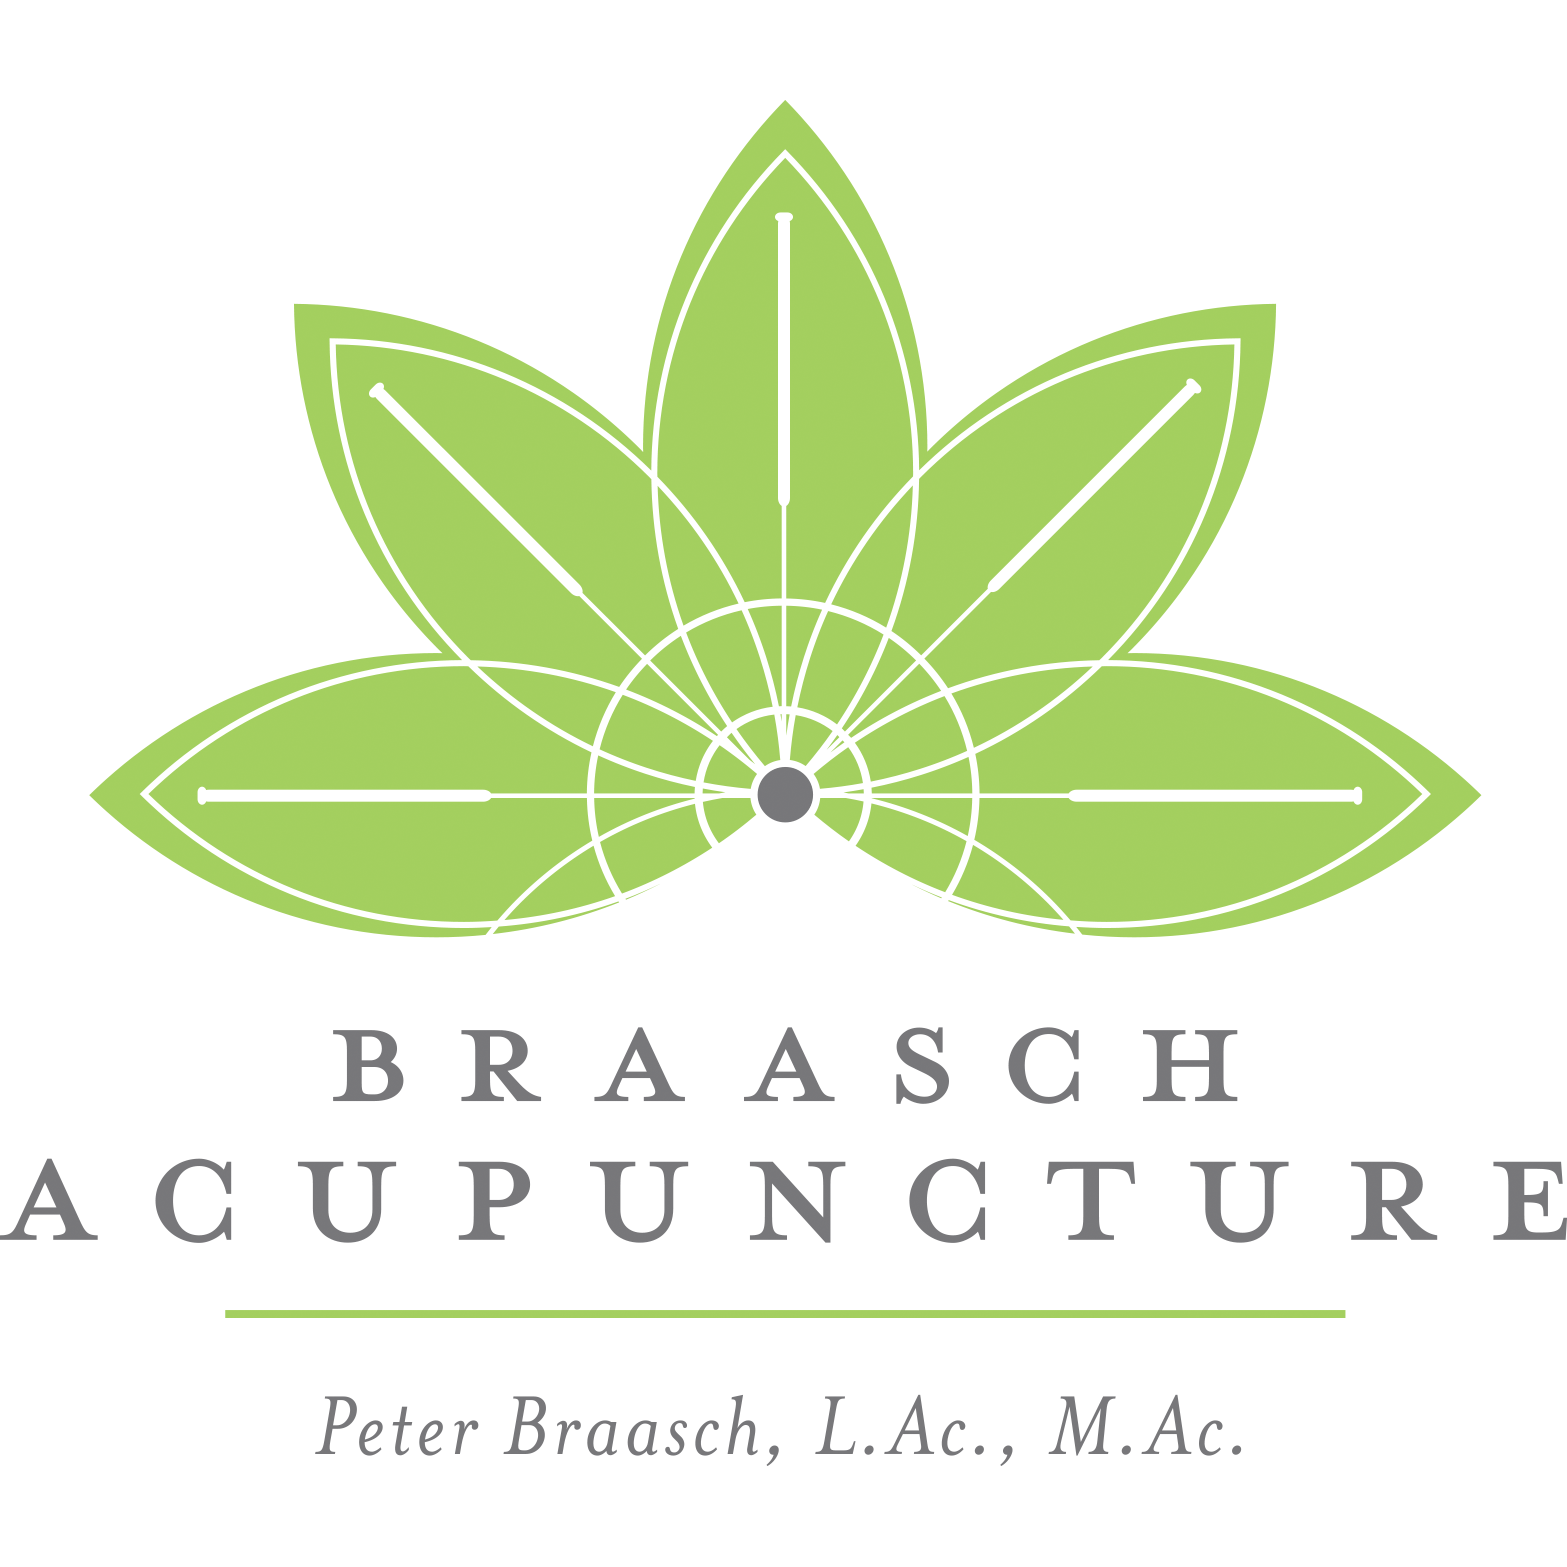 Braasch Acupuncture - Pittsburgh, PA 15217 - (412)400-8135 | ShowMeLocal.com